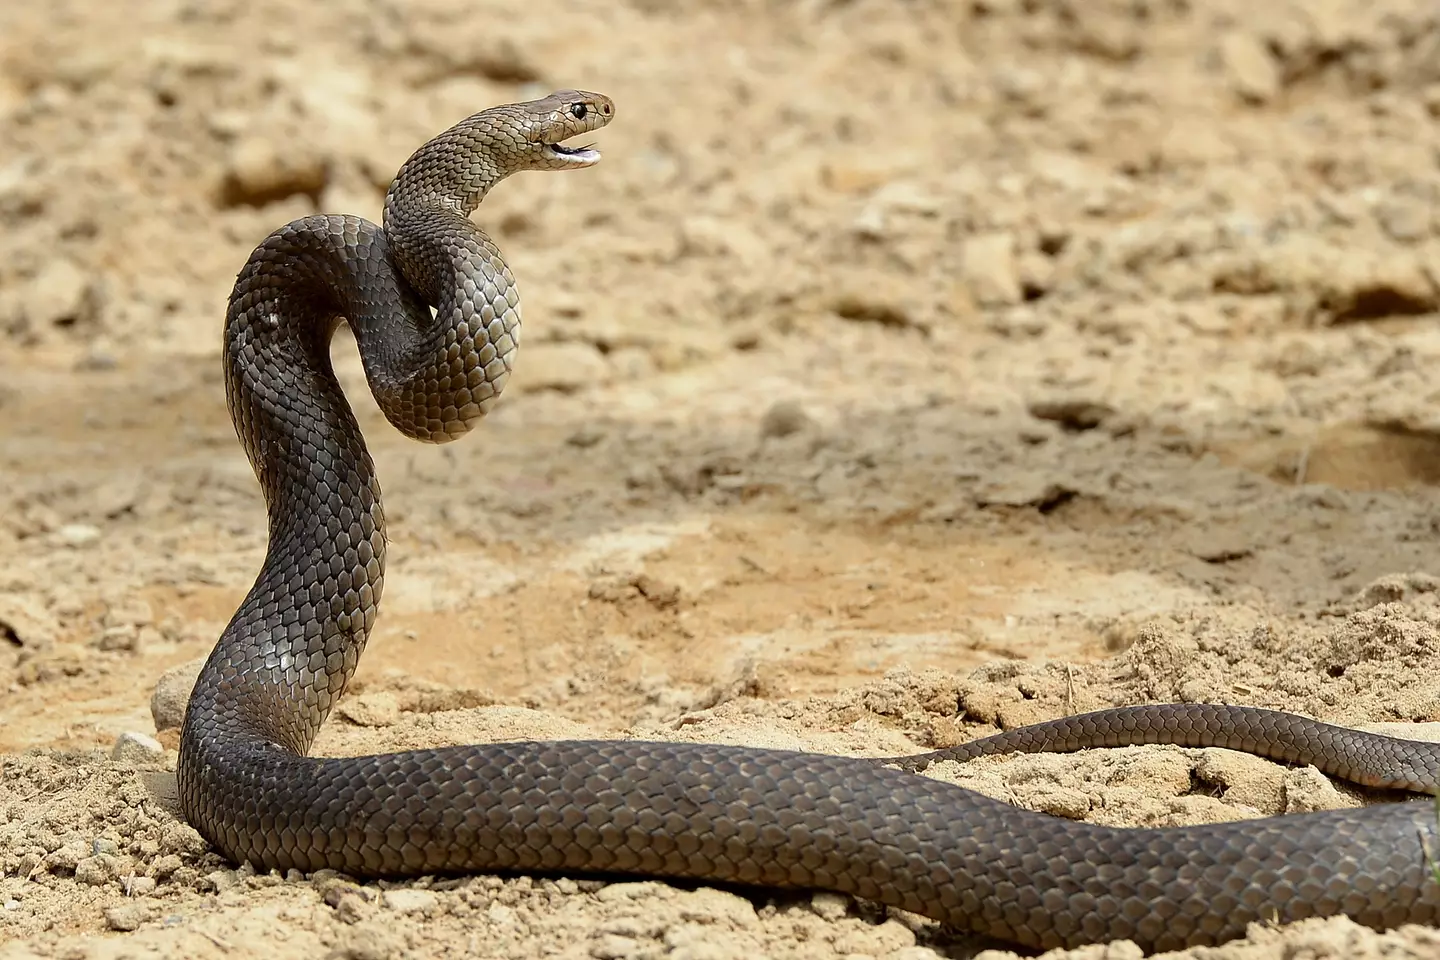 Eastern Brown Snakes are packed with a powerful venom that can kill.